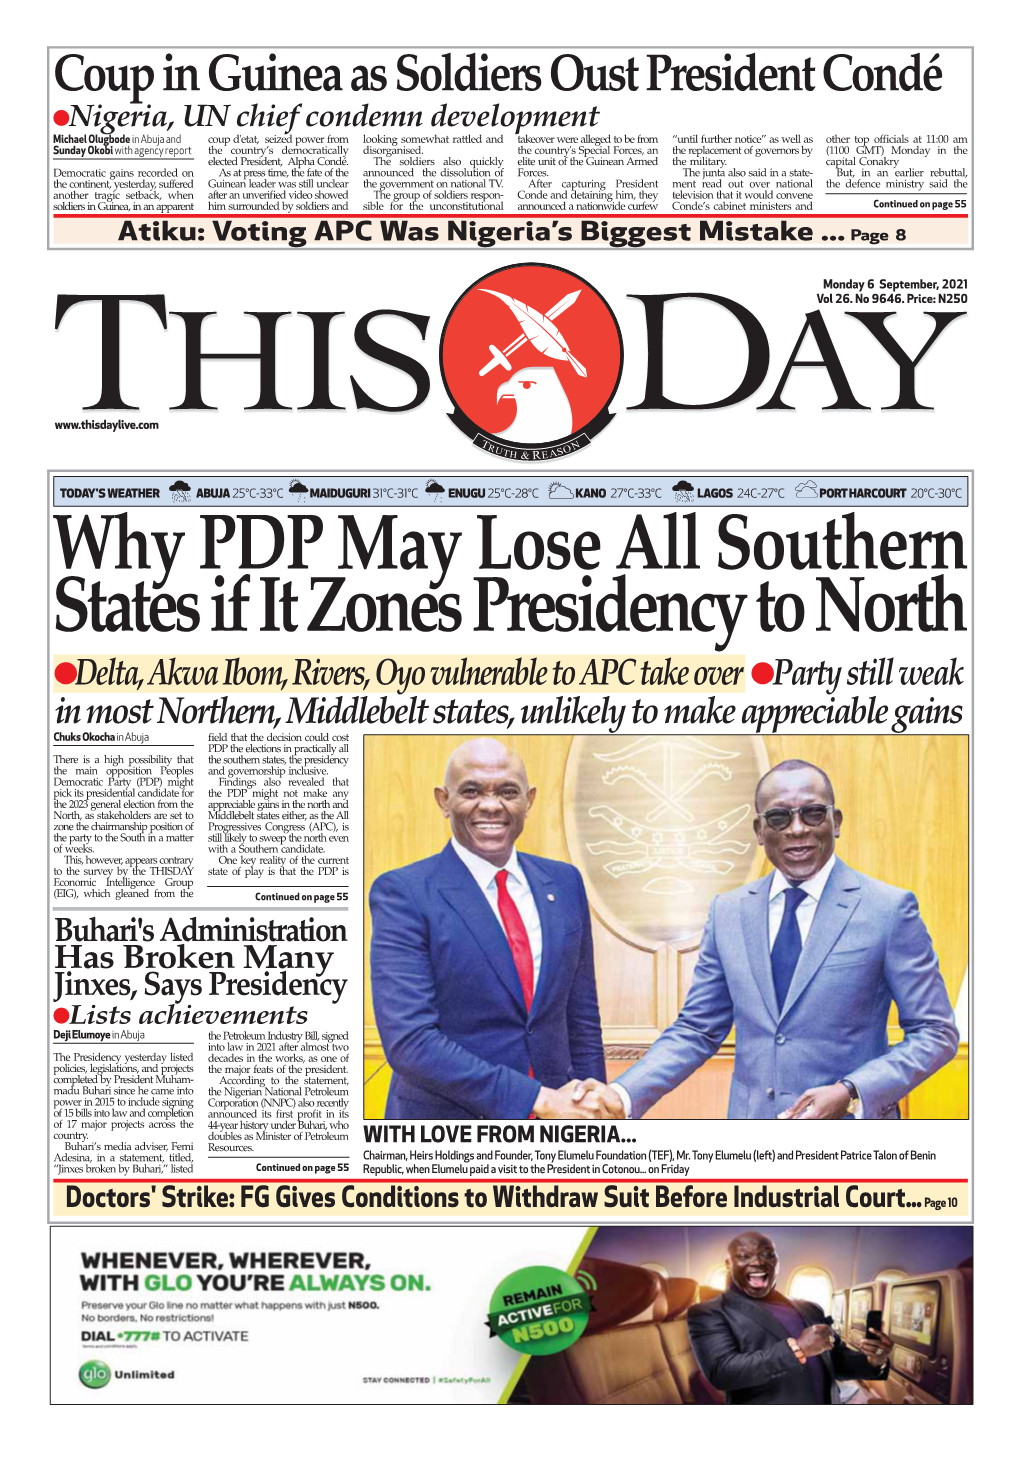 Why PDP May Lose All Southern States If It Zones Presidency to North